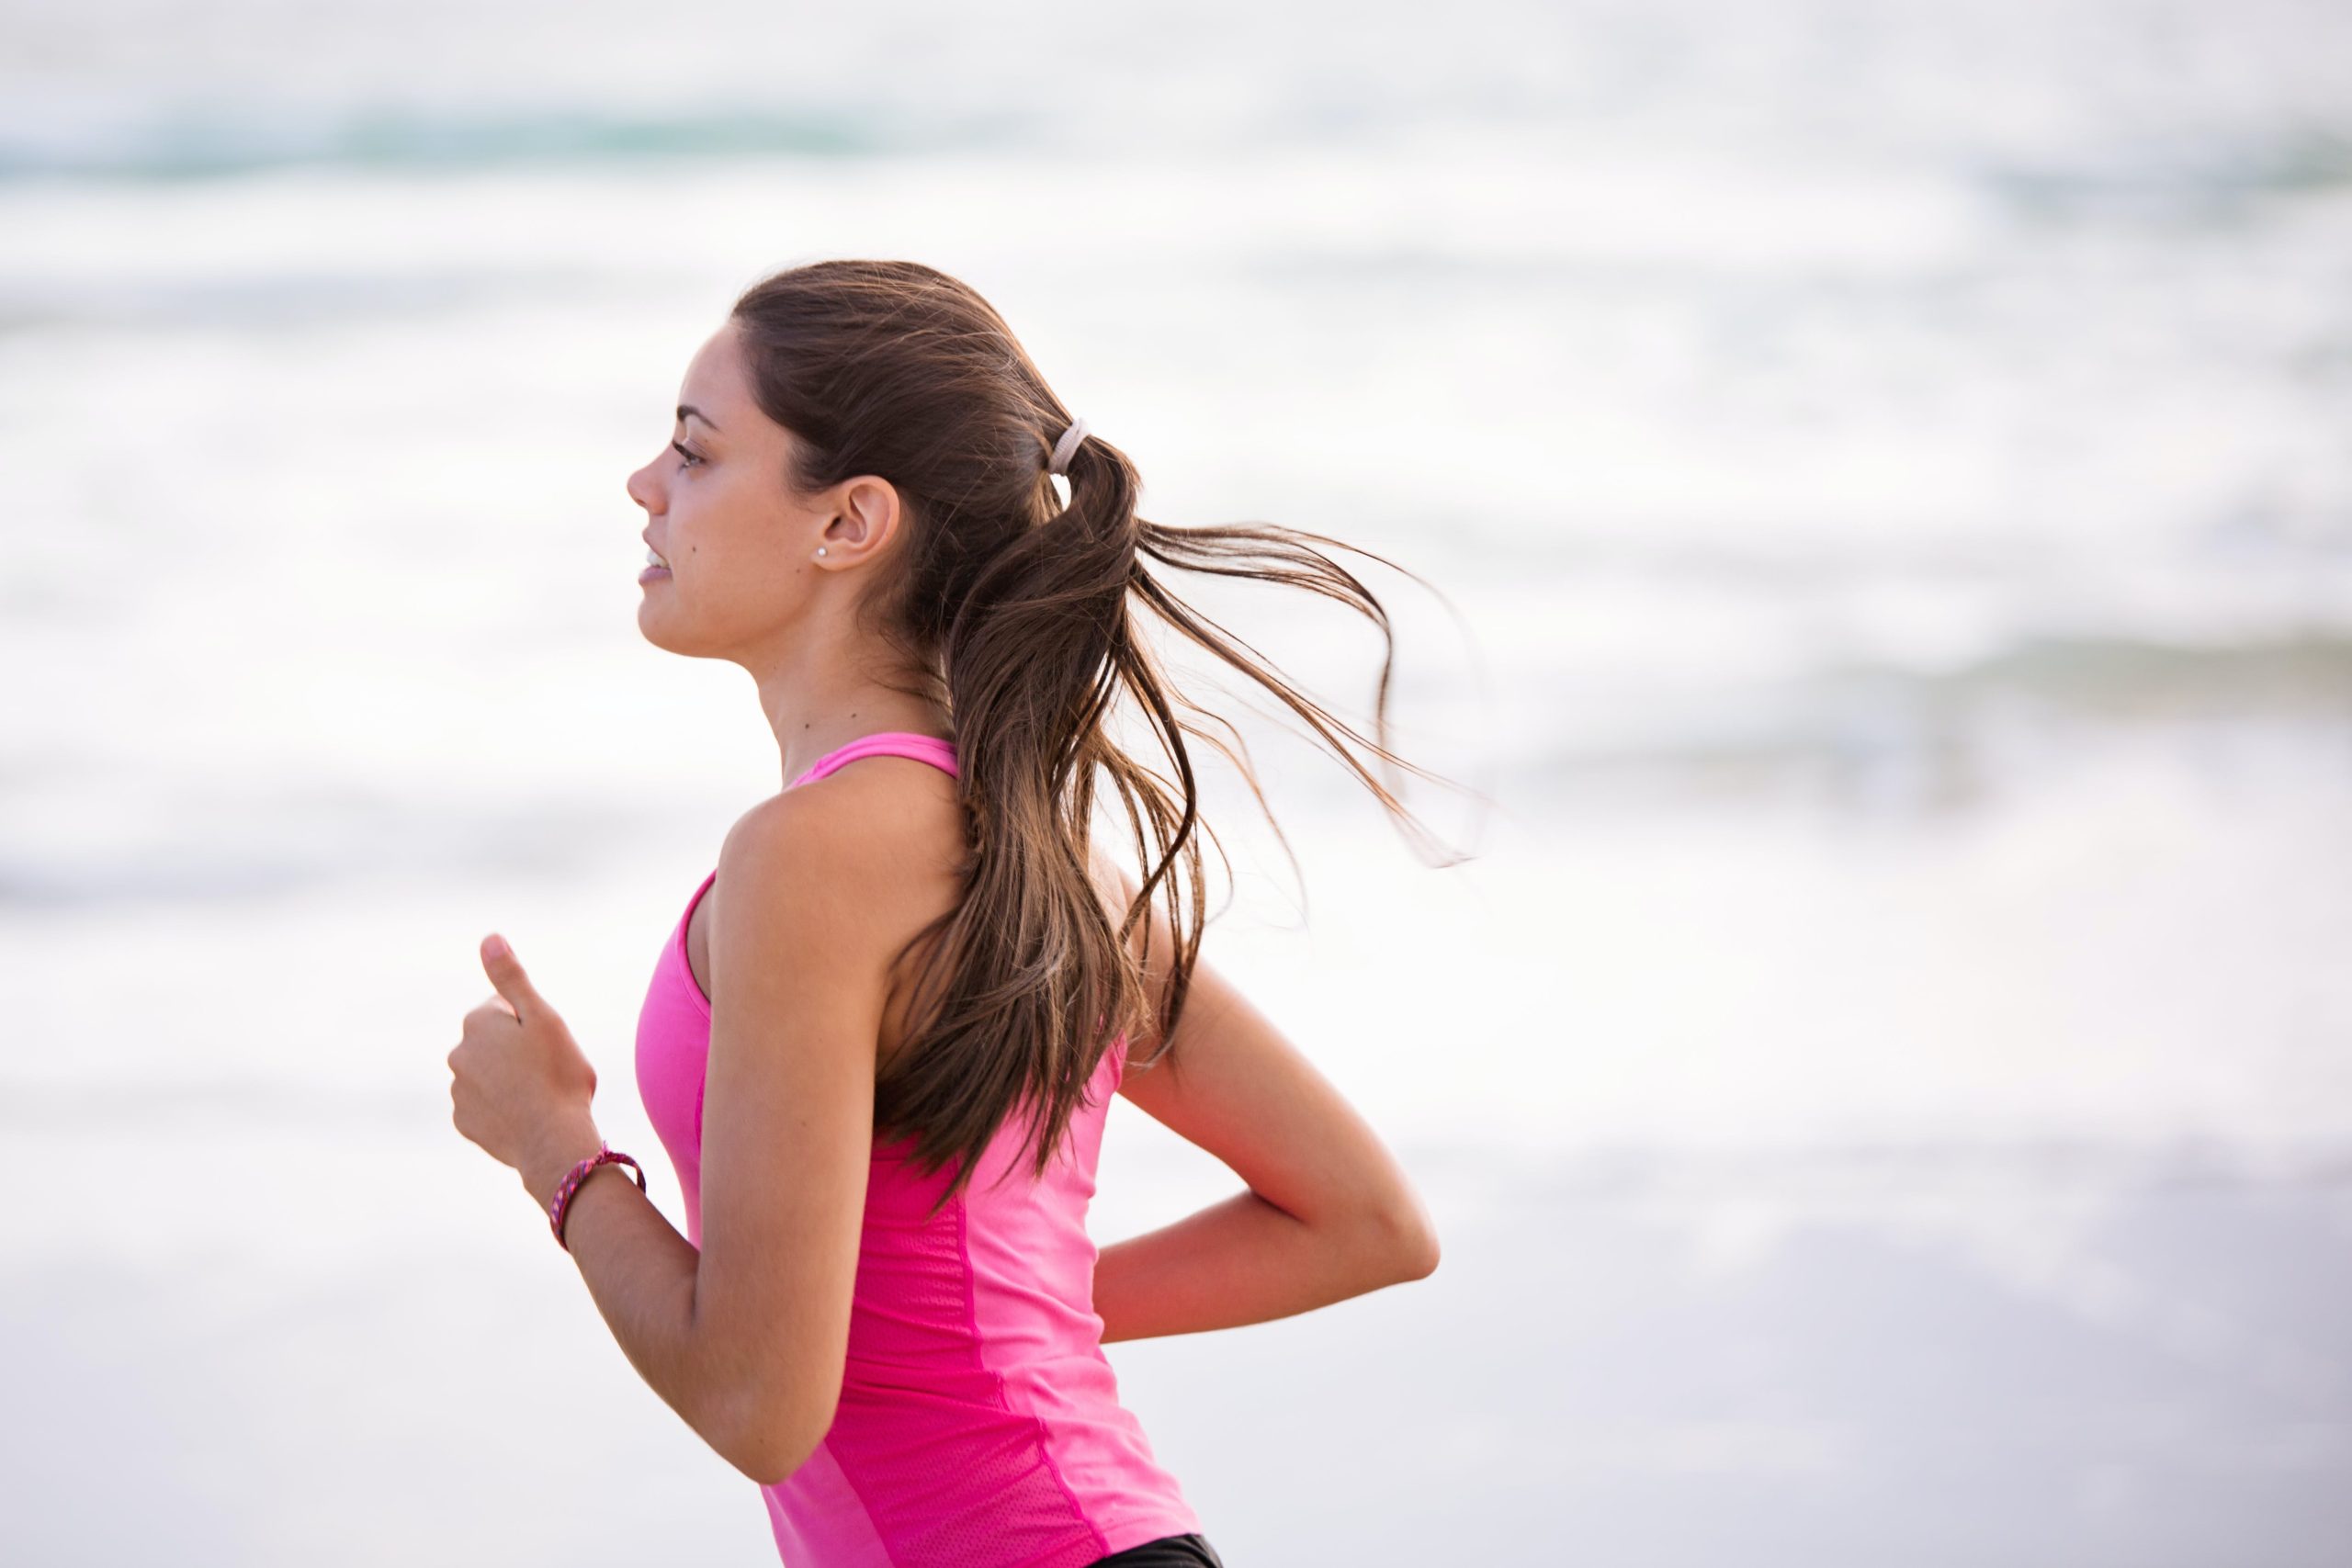 A young woman jogging on the beach.